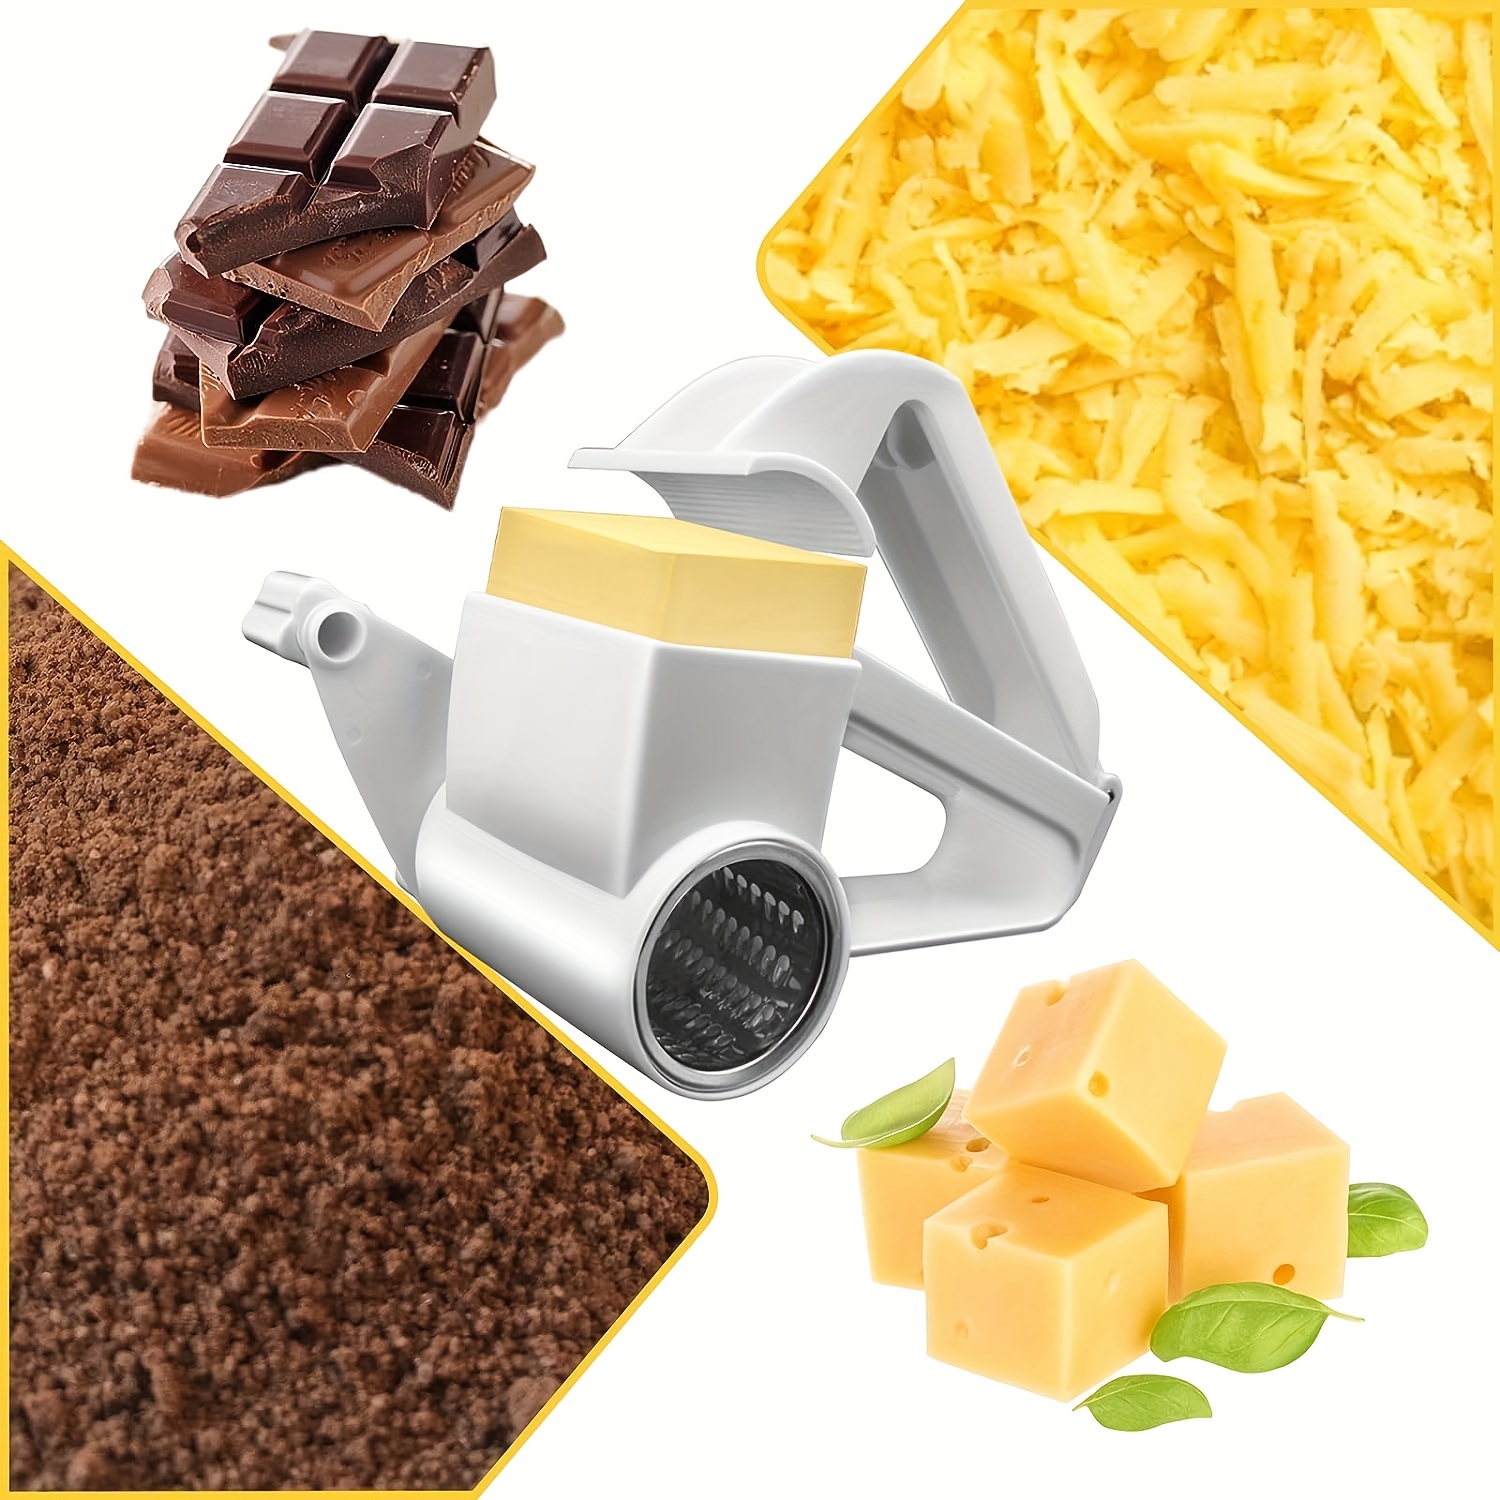 1pc, Cheese Grater With Handle, Household Cheese Grater, Manual Rotary  Cheese Grater, Reusable Cheese Grater Drums For Hard Cheese Chocolate Nuts,  Kit